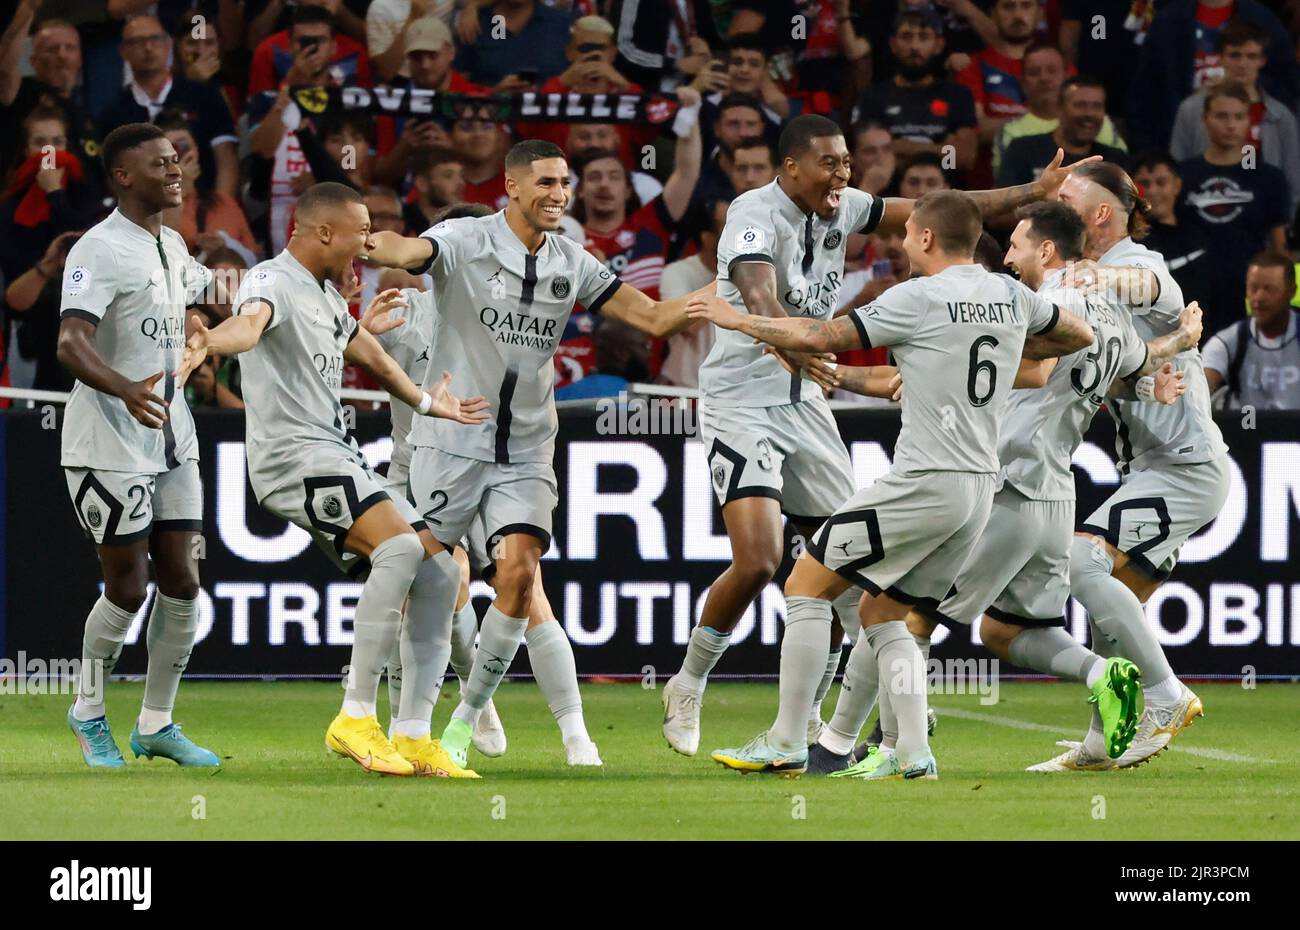 Lille, France. 21st Aug, 2022. Paris Saint-Germain's players celebrate after scoring during a French Ligue 1 football match between Lille and Paris Saint-Germain (PSG) at Stade Pierre-Mauroy in Villeneuve-d'Asq, northern France, Aug. 21, 2022. Credit: Rit Heize/Xinhua/Alamy Live News Stock Photo